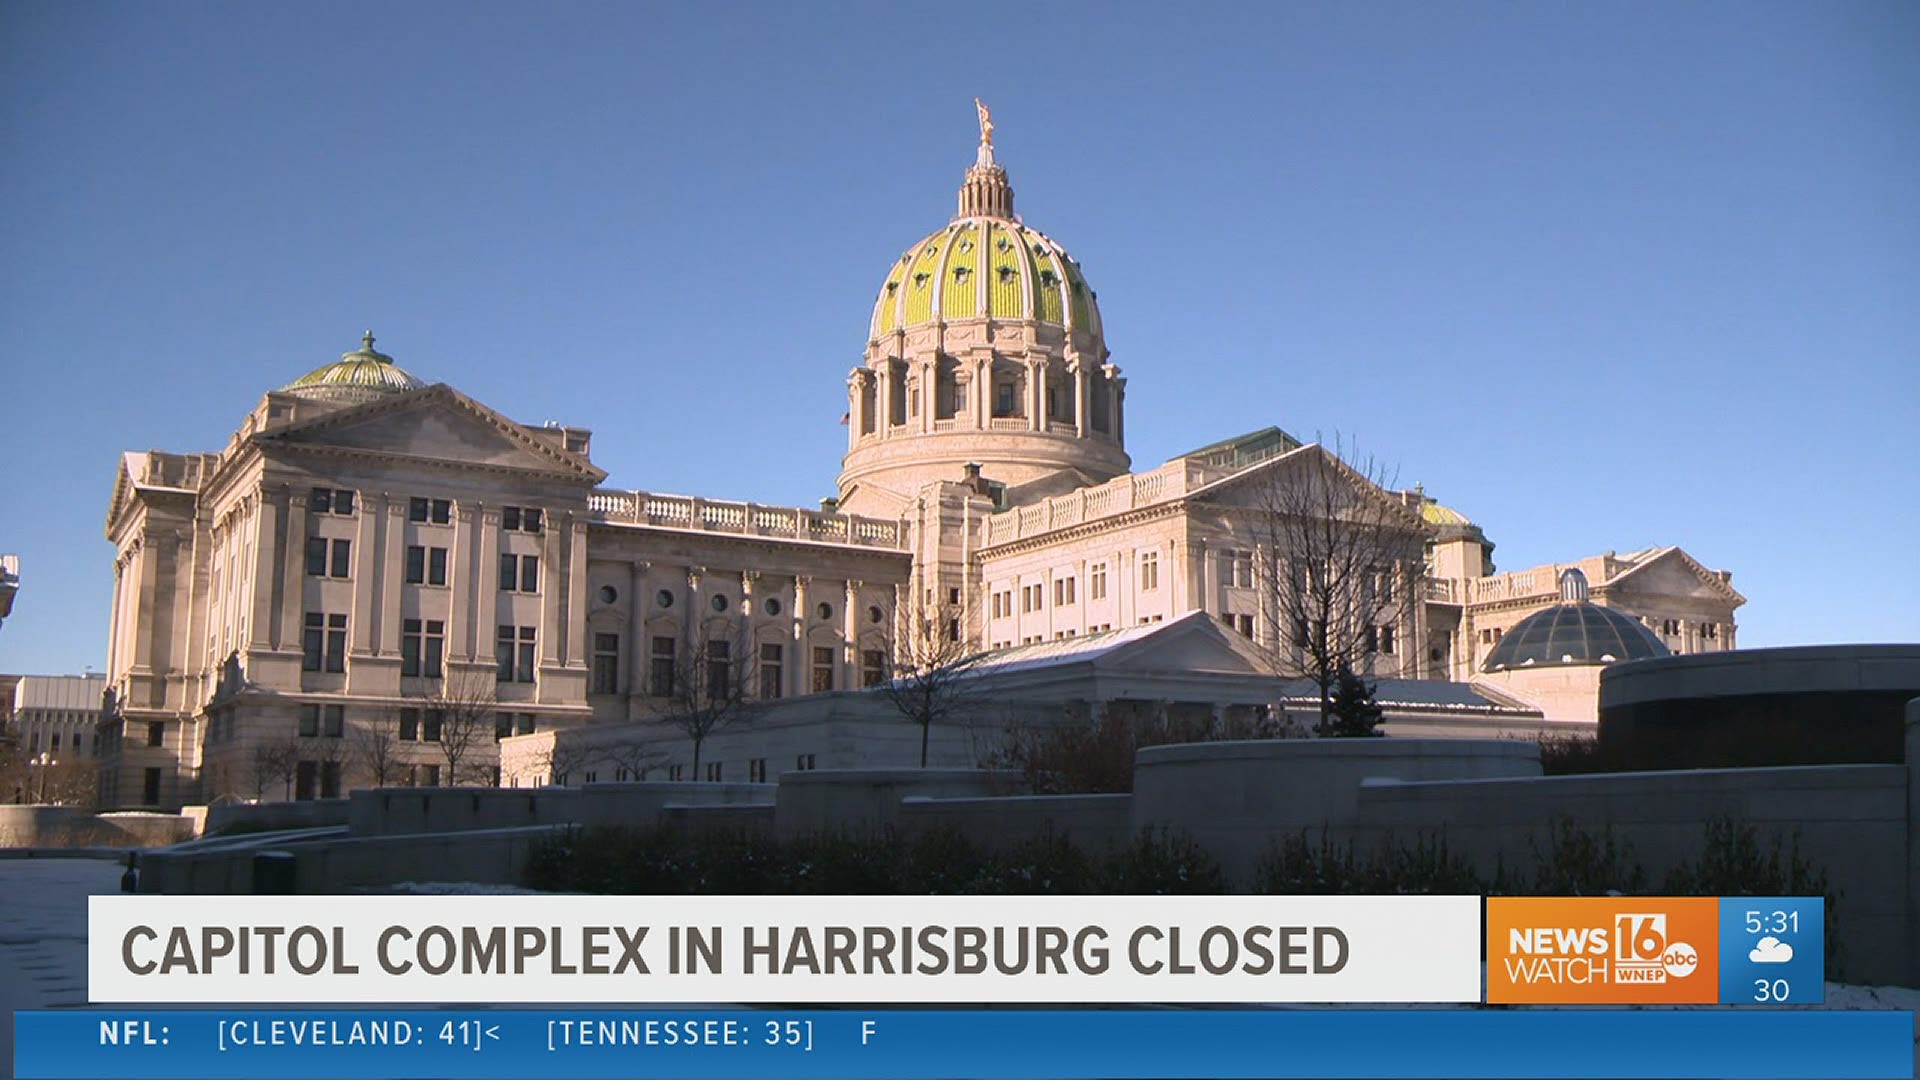 You can cross off a visit to the capitol complex in Harrisburg to look at the Christmas decorations this year. It's not happening and you can blame the pandemic.